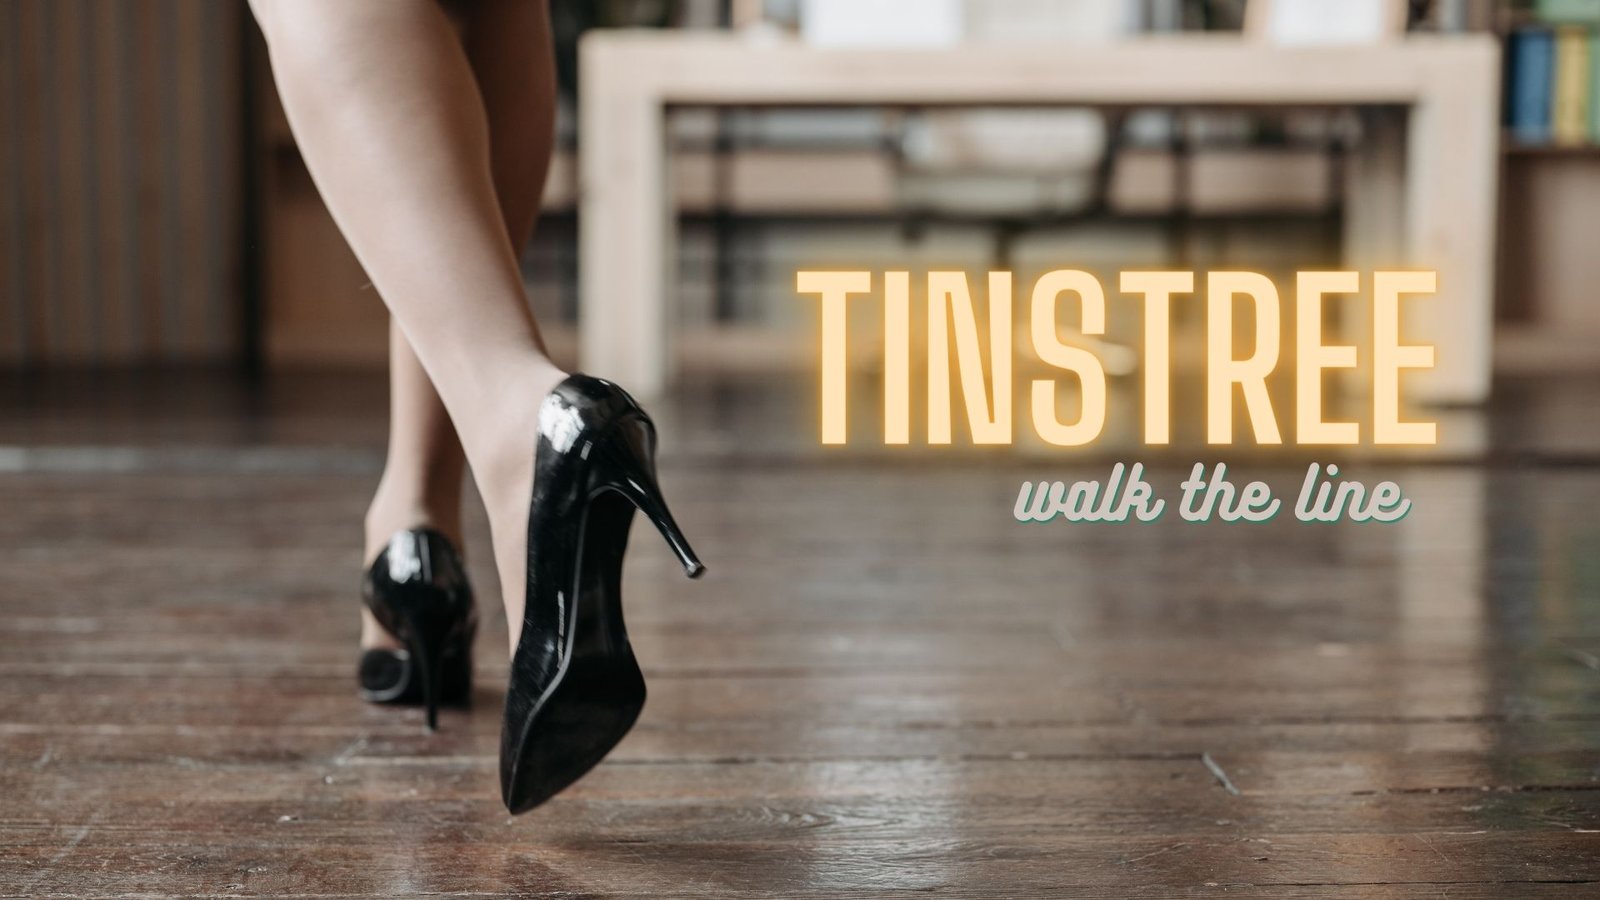 tinstree shoes